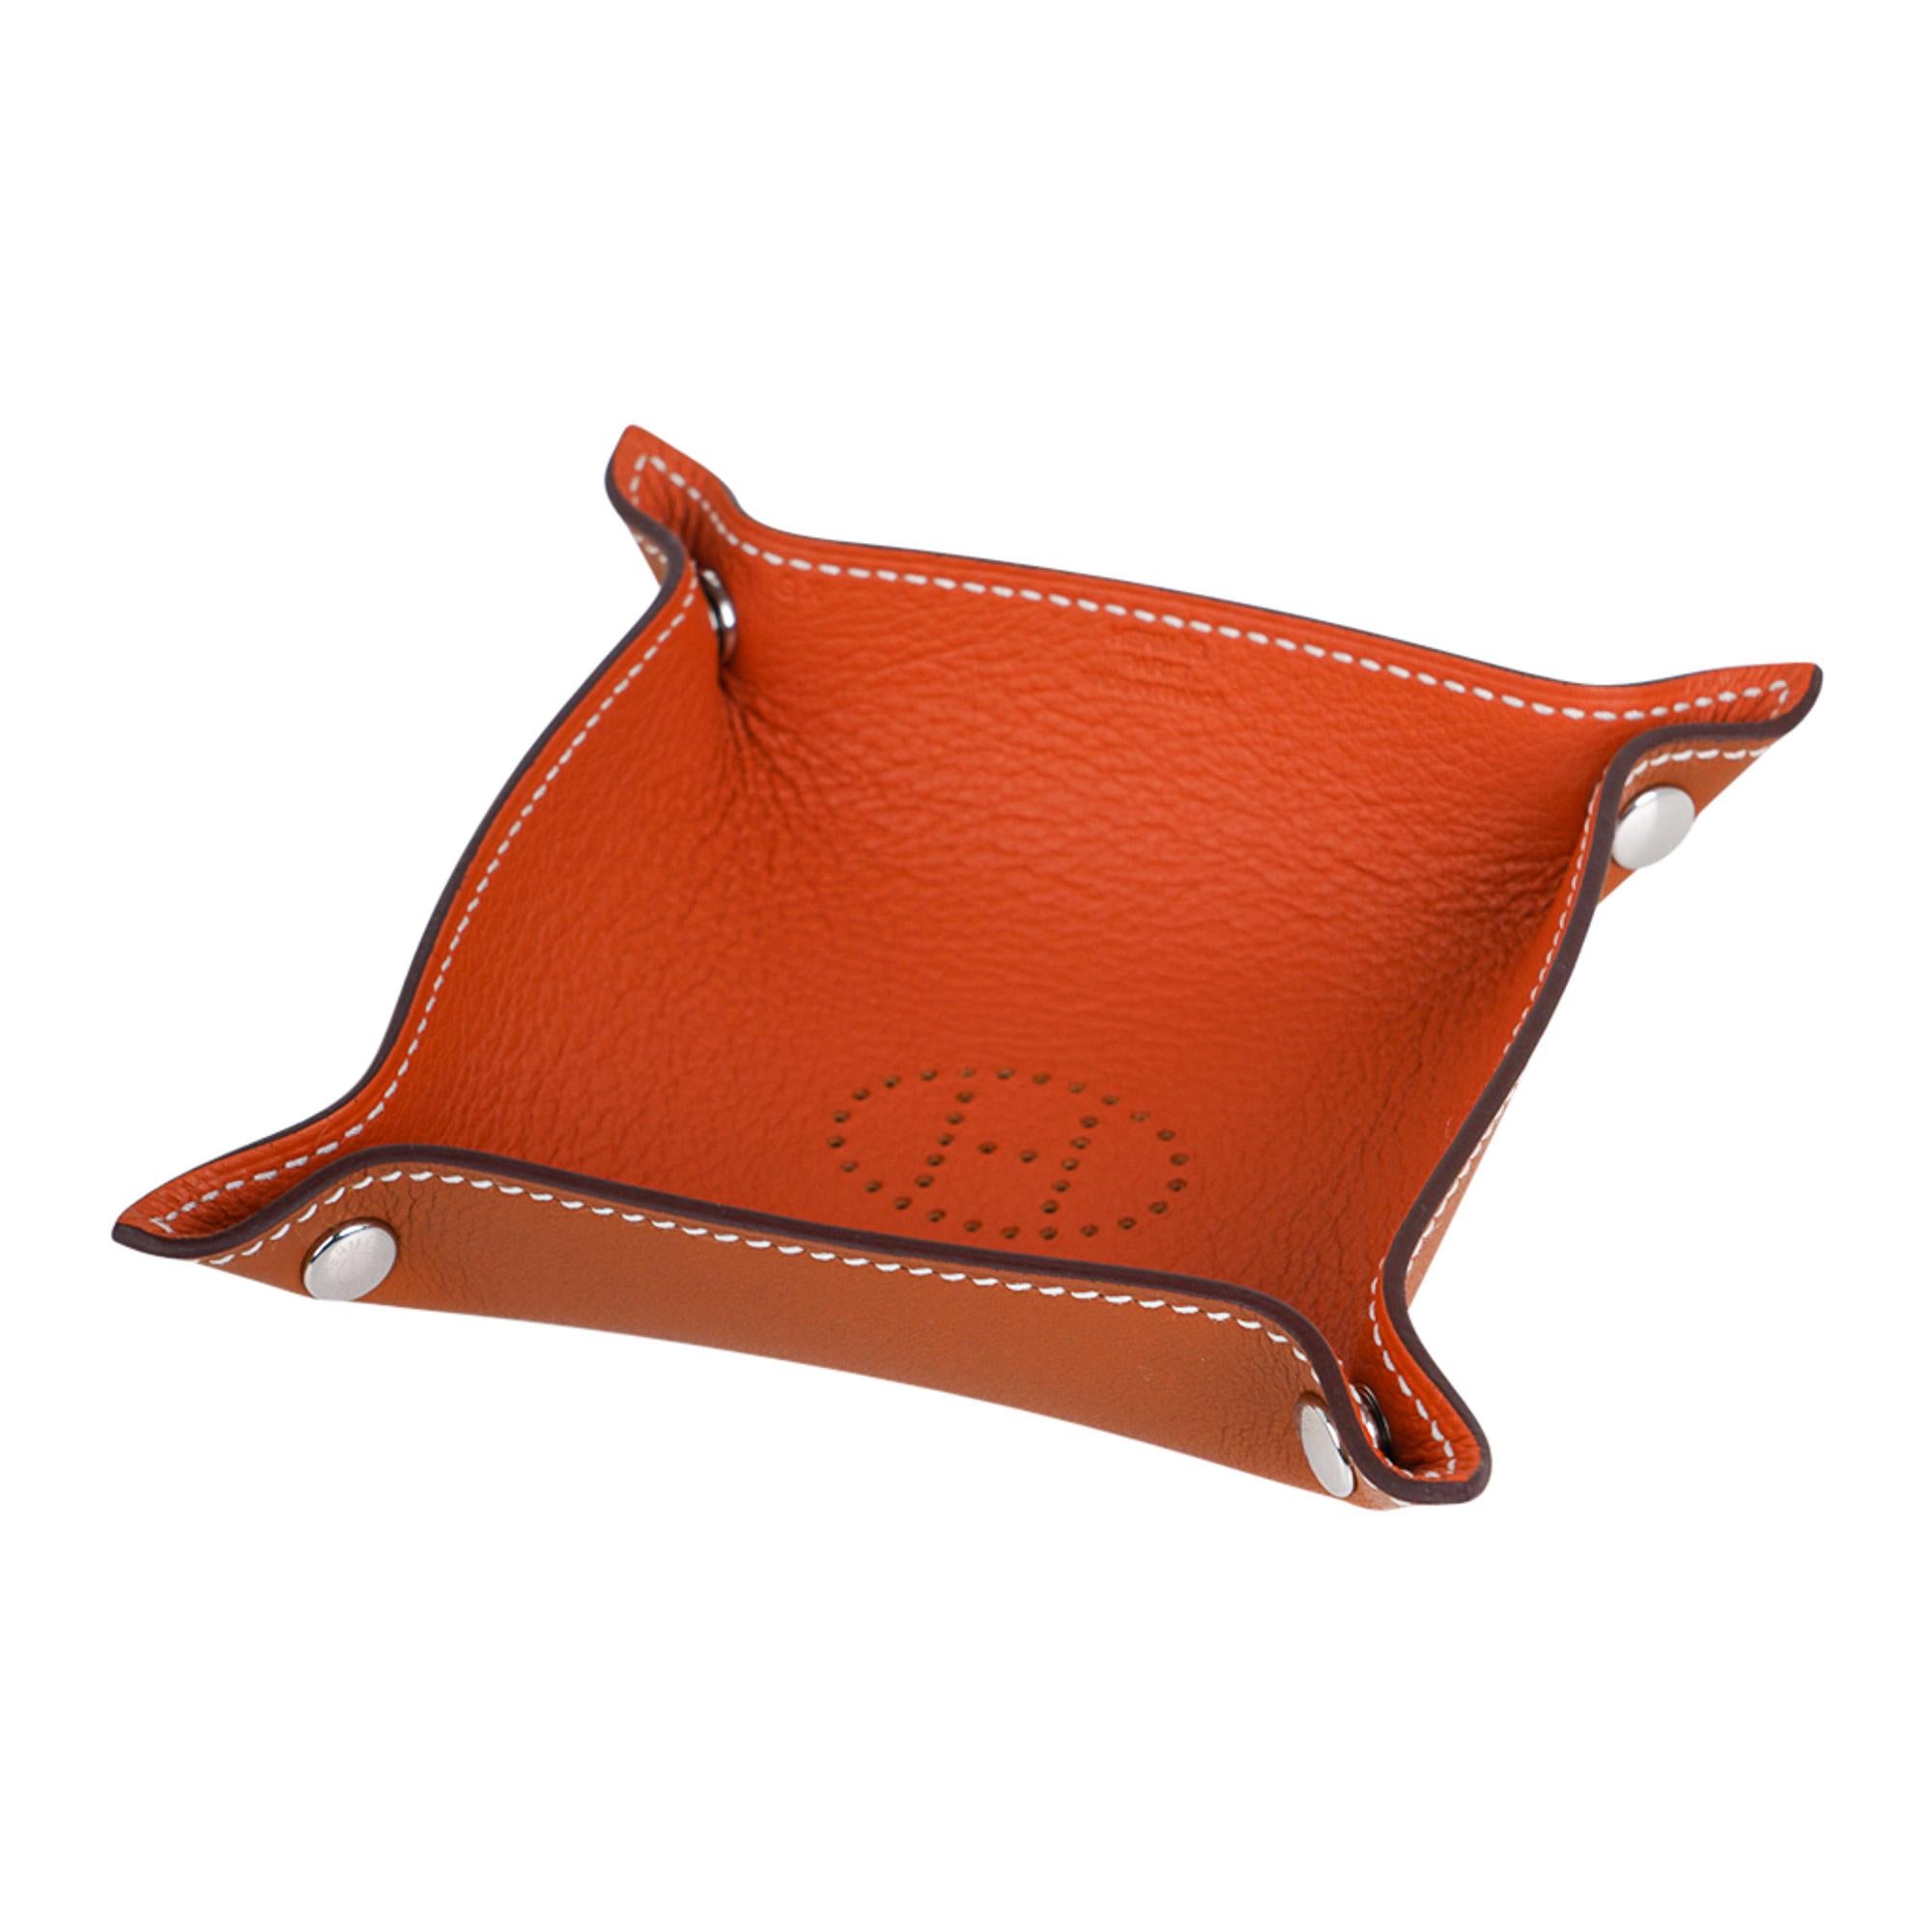 Mightychic offers a guaranteed authentic Hermes Mises et Relances Orange and Fauve bi-colour mini change tray.
Beautifully crafted in Clemence and Swift leather.
Palladium clou de selle snaps.
A beautiful desk or bedroom accessory.
Stamped Hermes